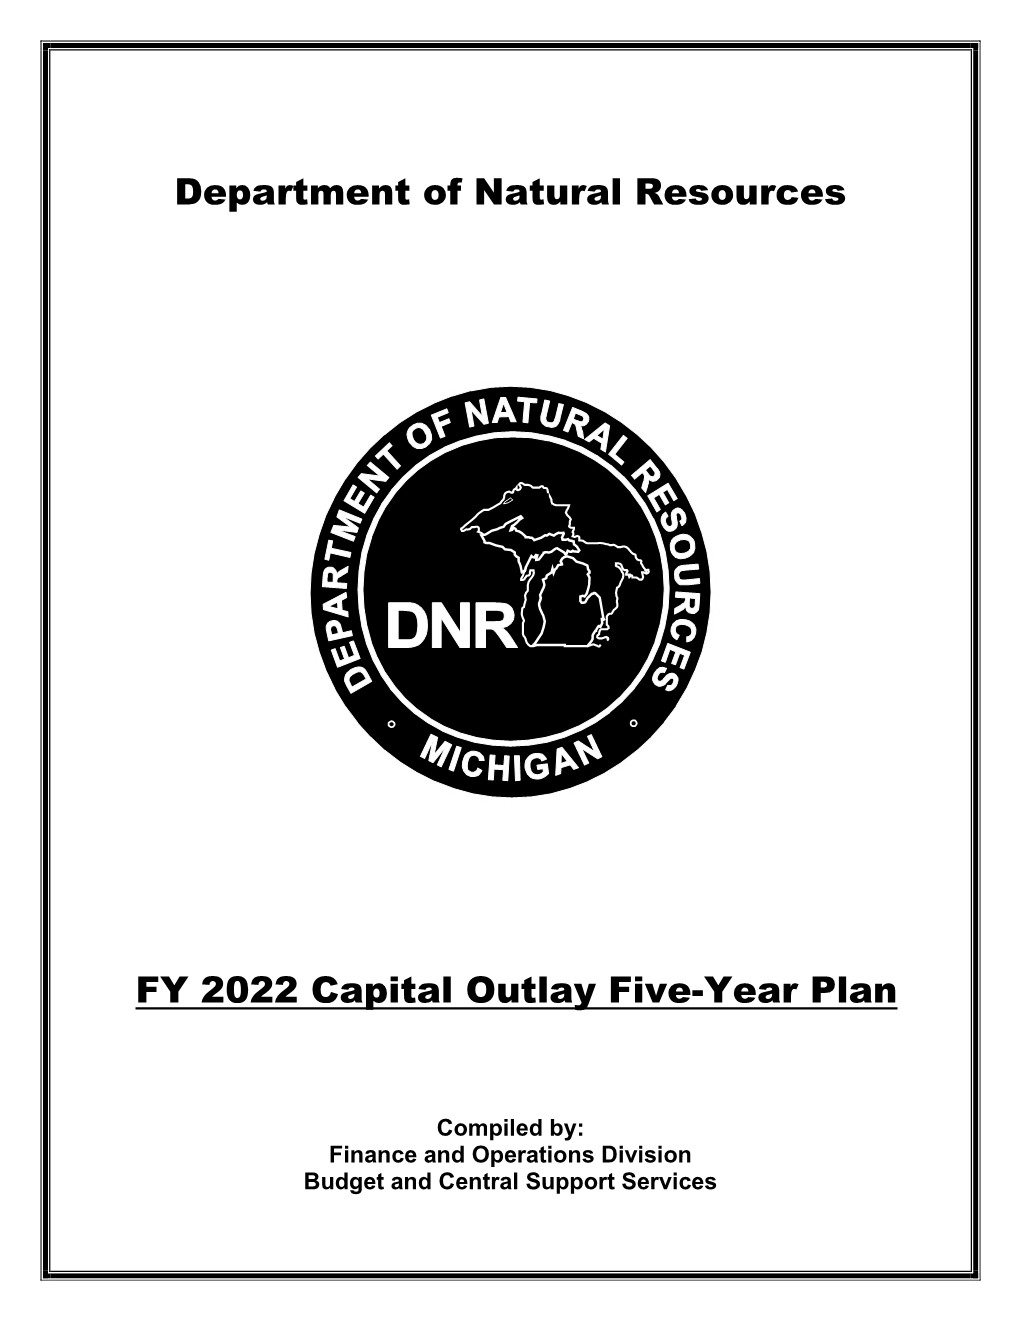 Department of Natural Resources FY 2022 Capital Outlay Five-Year Plan